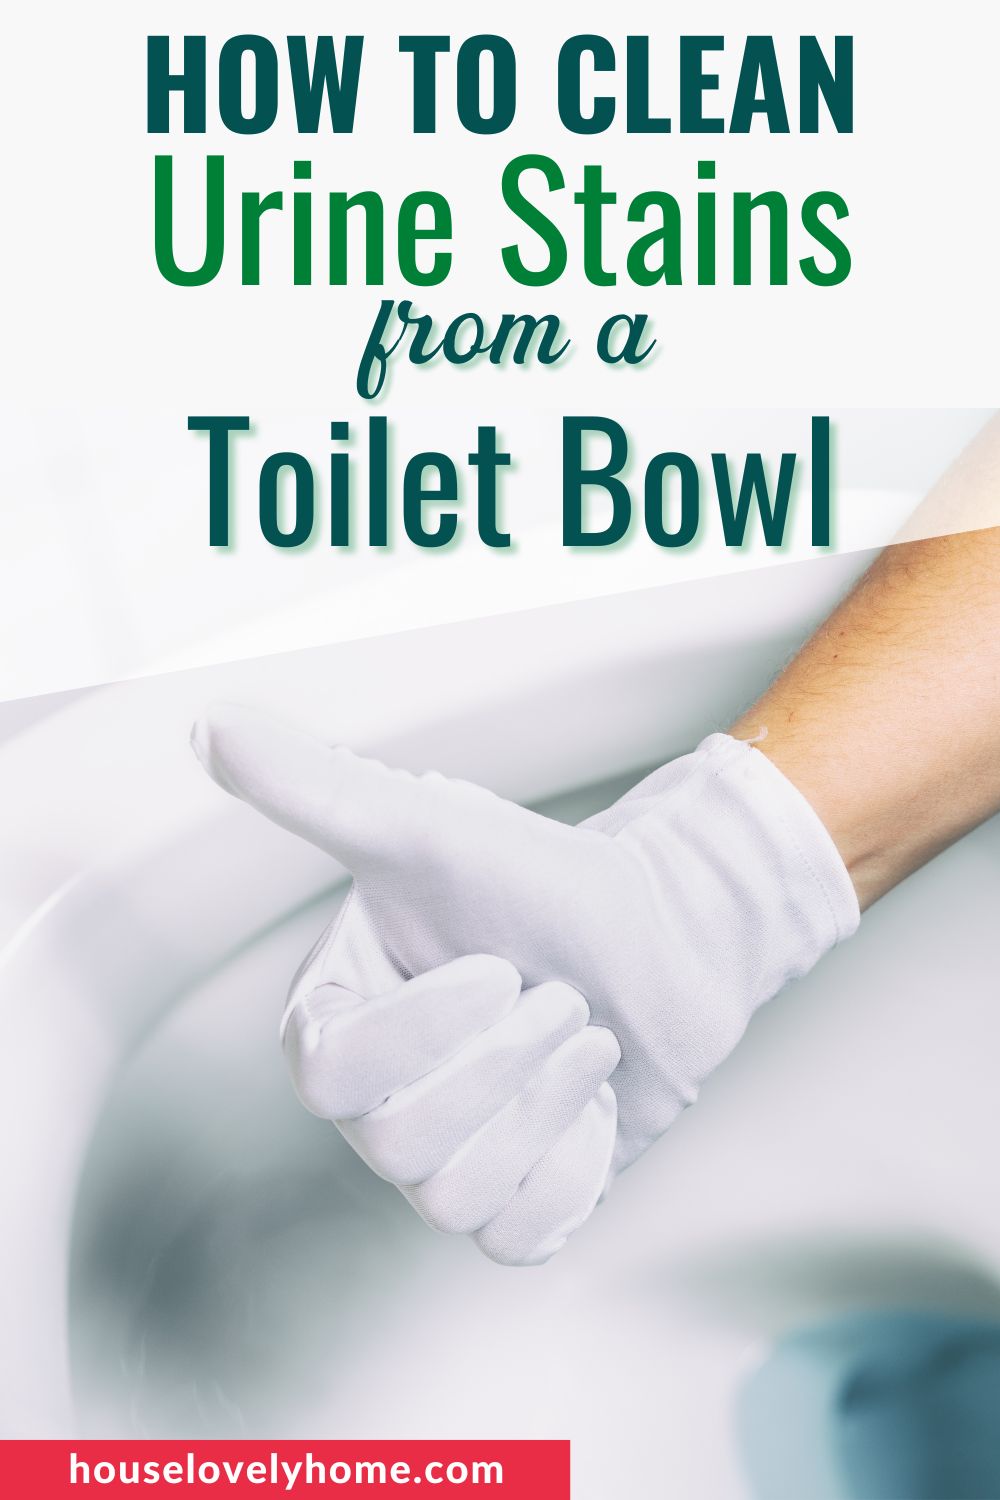 A hand gesturing a thumb up over a clean toilet bowl with text overlays that read How to Clean Urine Stains From a Toilet Bowl.